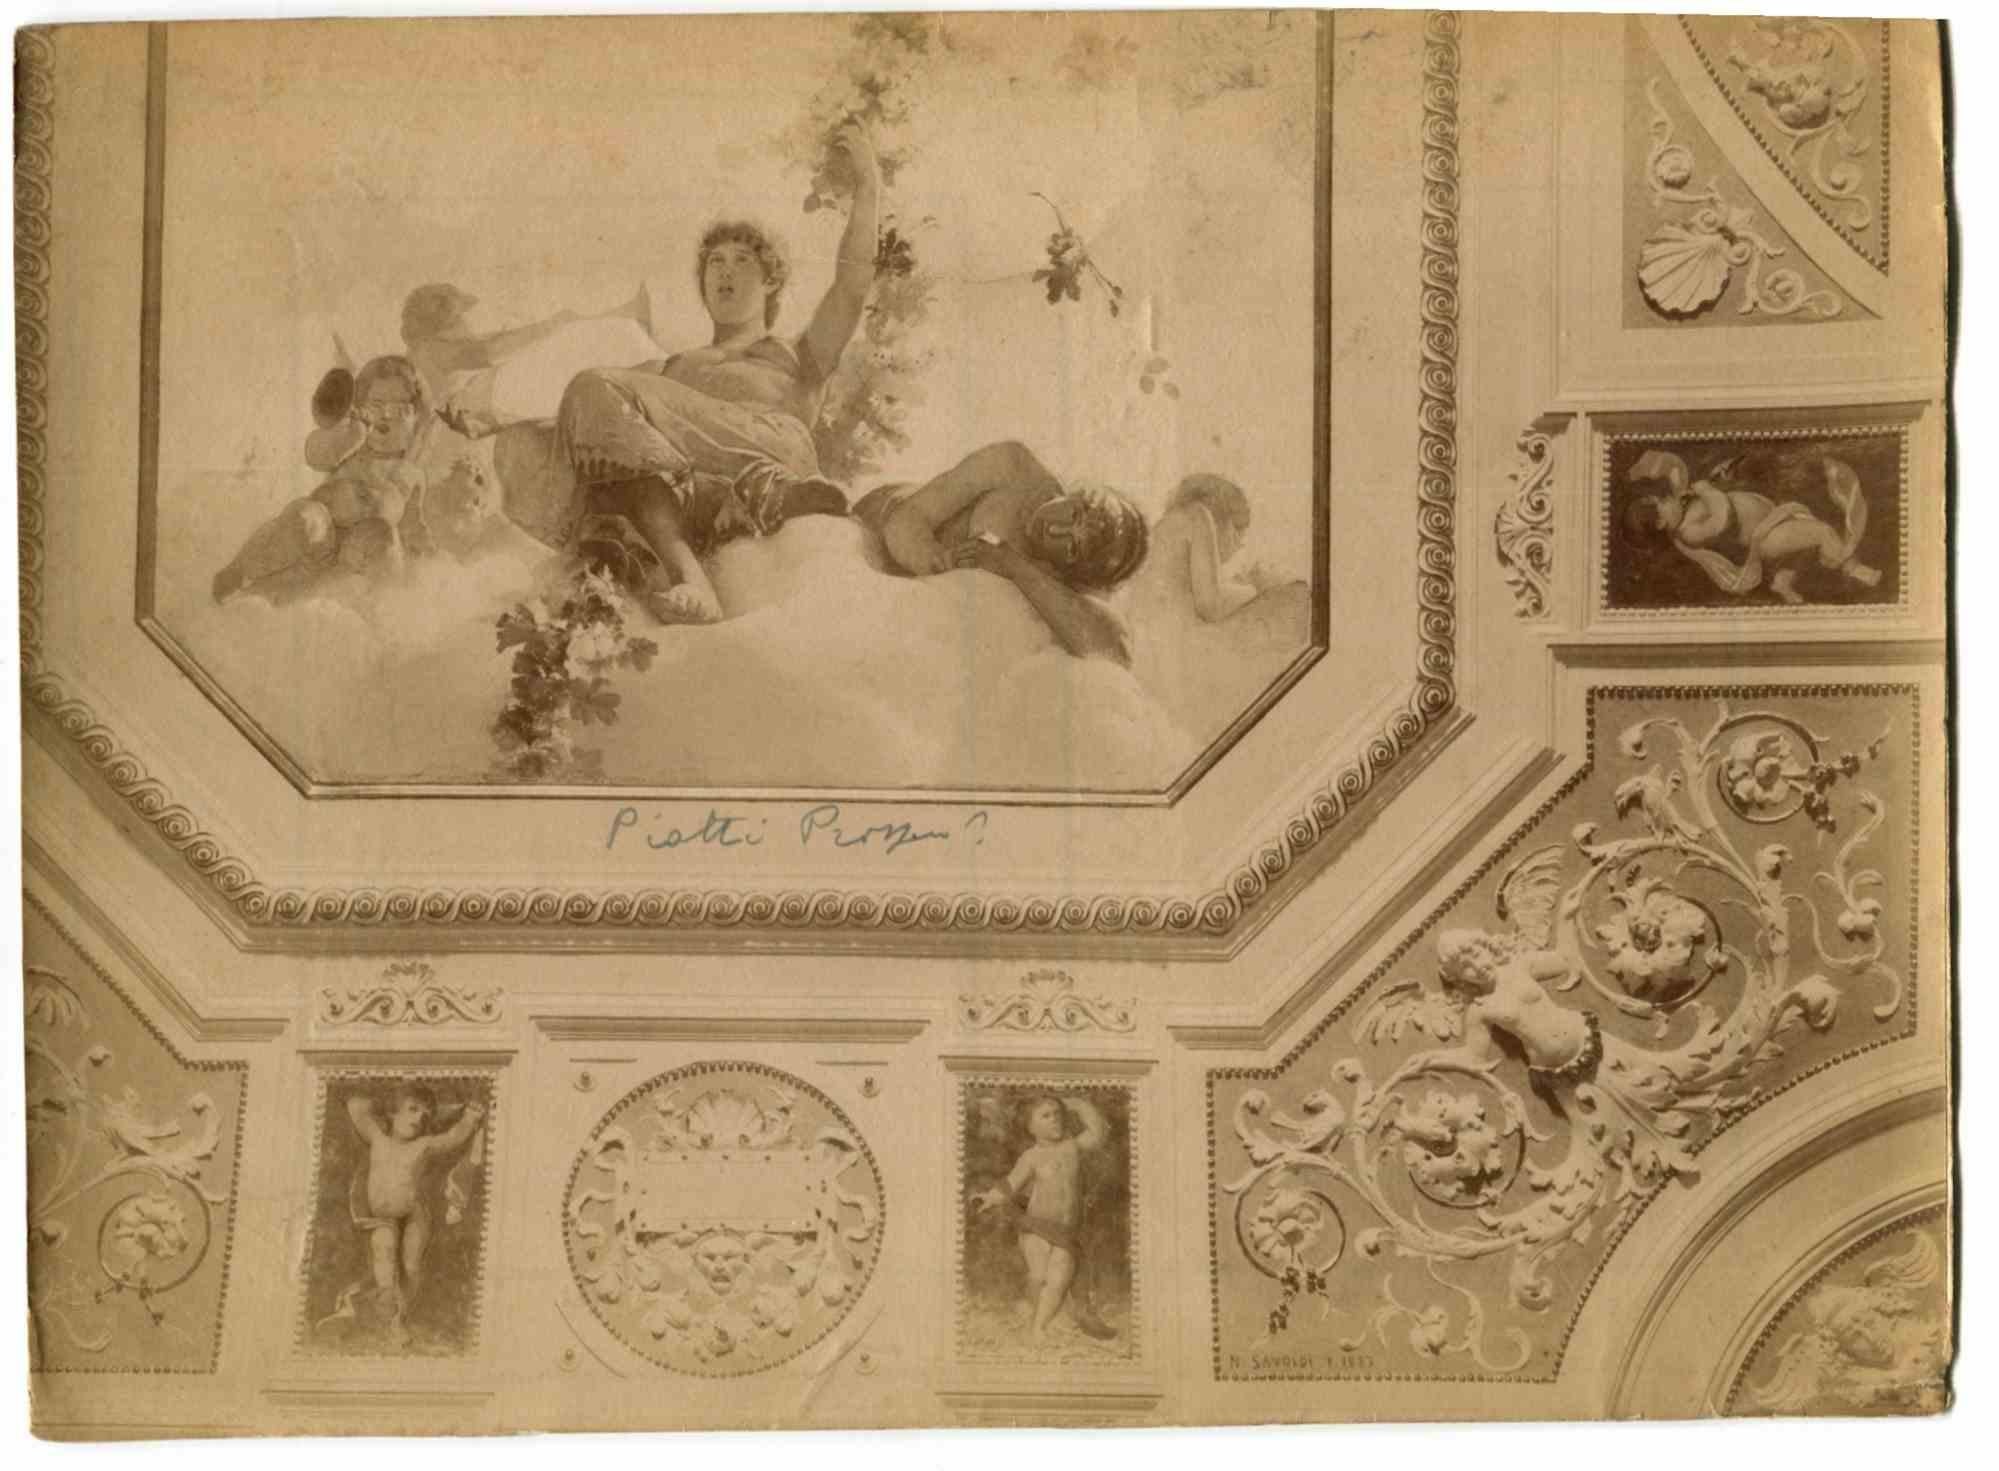 Unknown Figurative Photograph - Vintage Photo of a Fresco - Vintage Photo - Early 20th Century